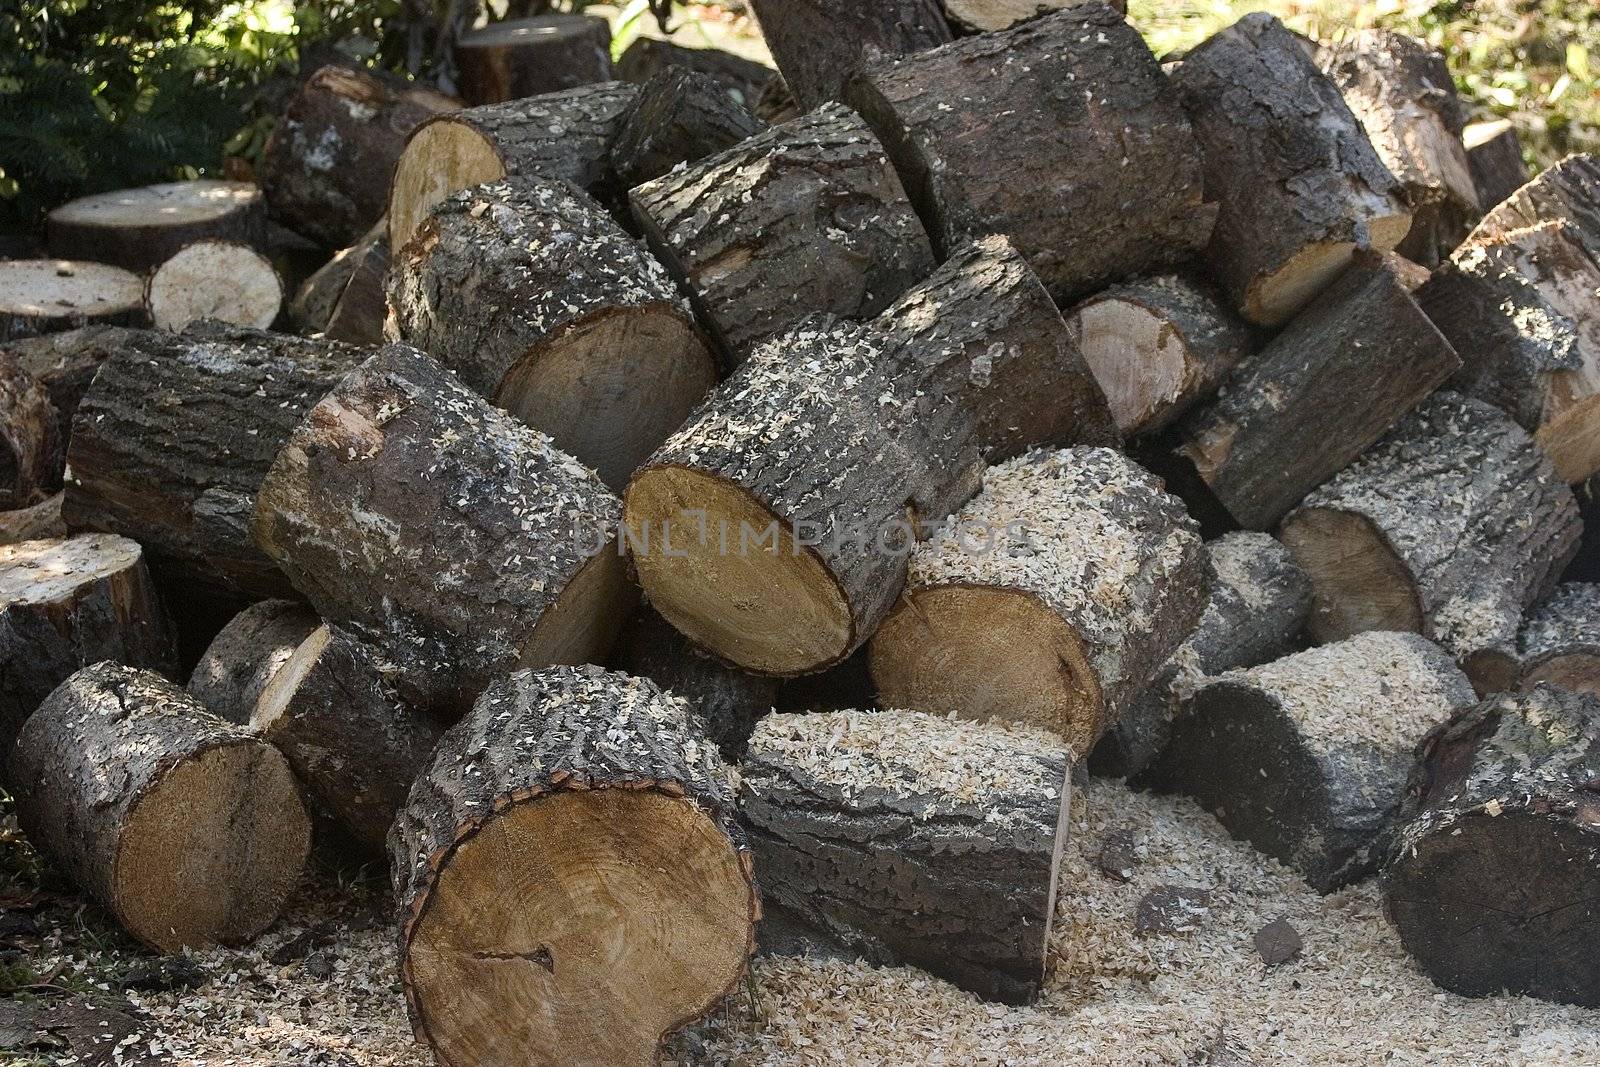 Chopped timber in a pile ready to be used
